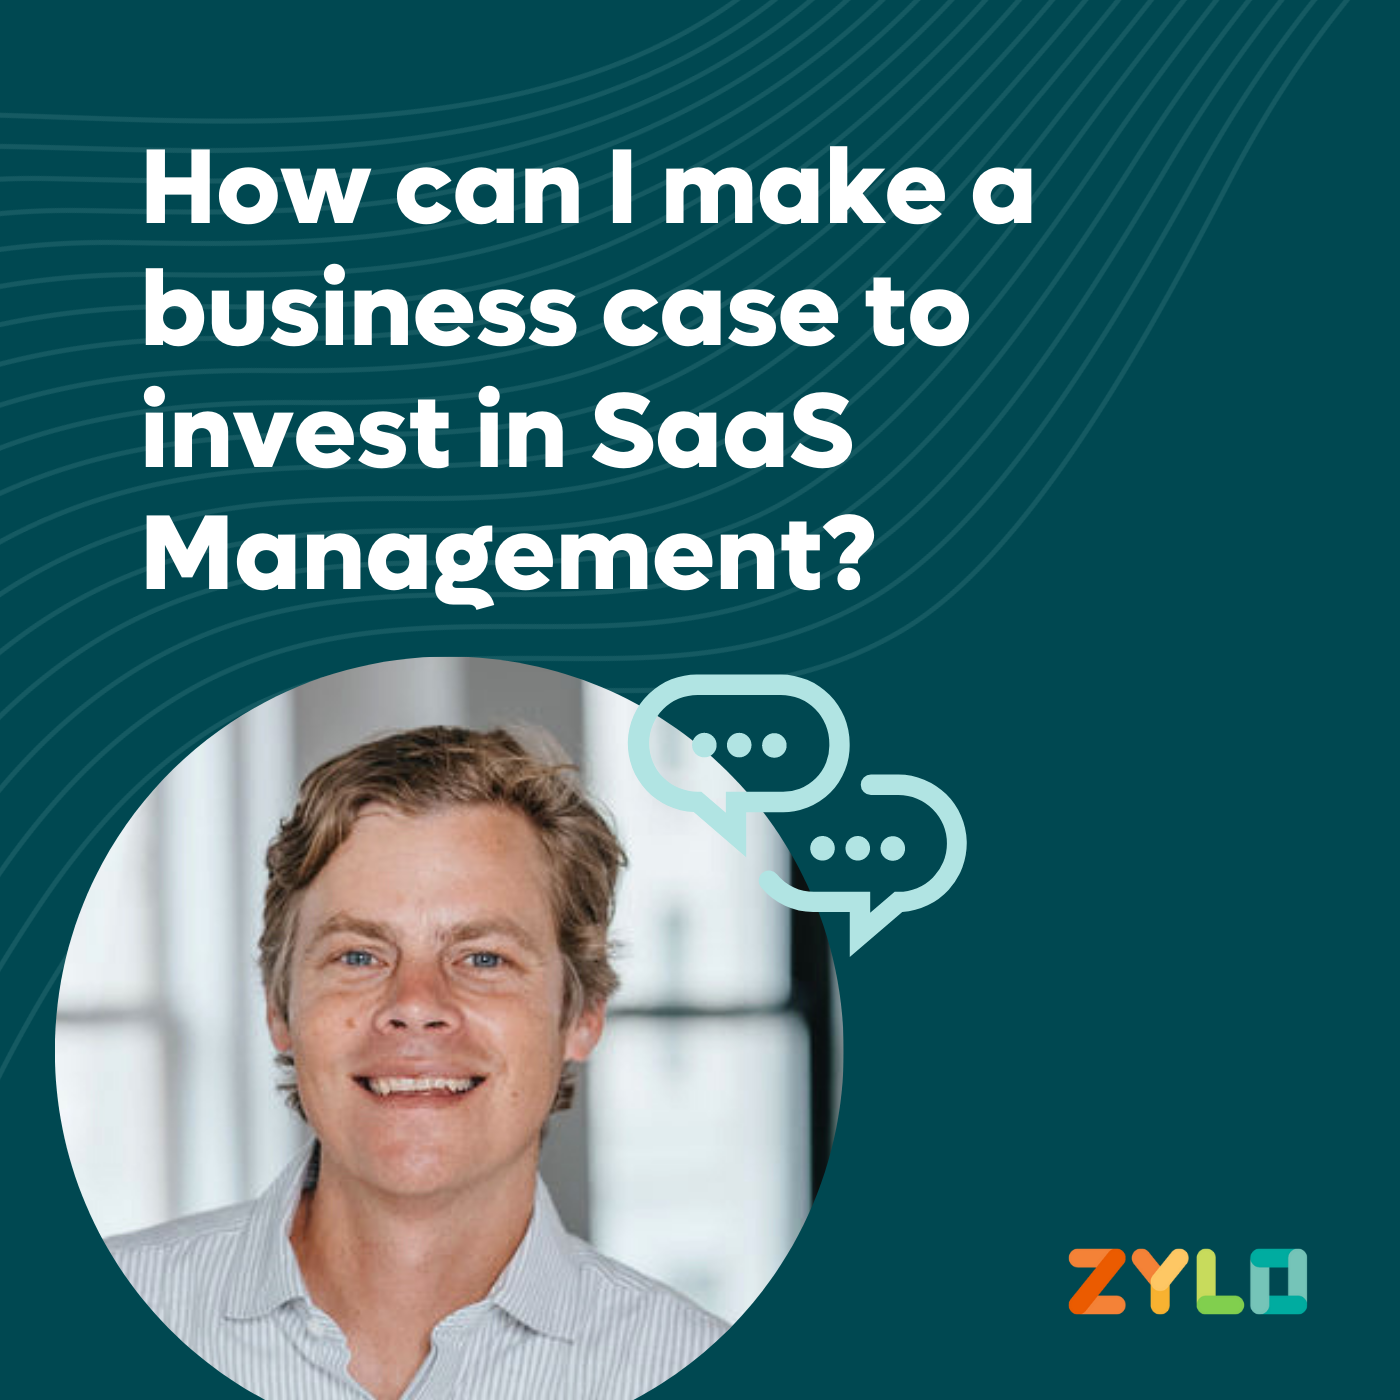 How can I make a business case to invest in SaaS Management?